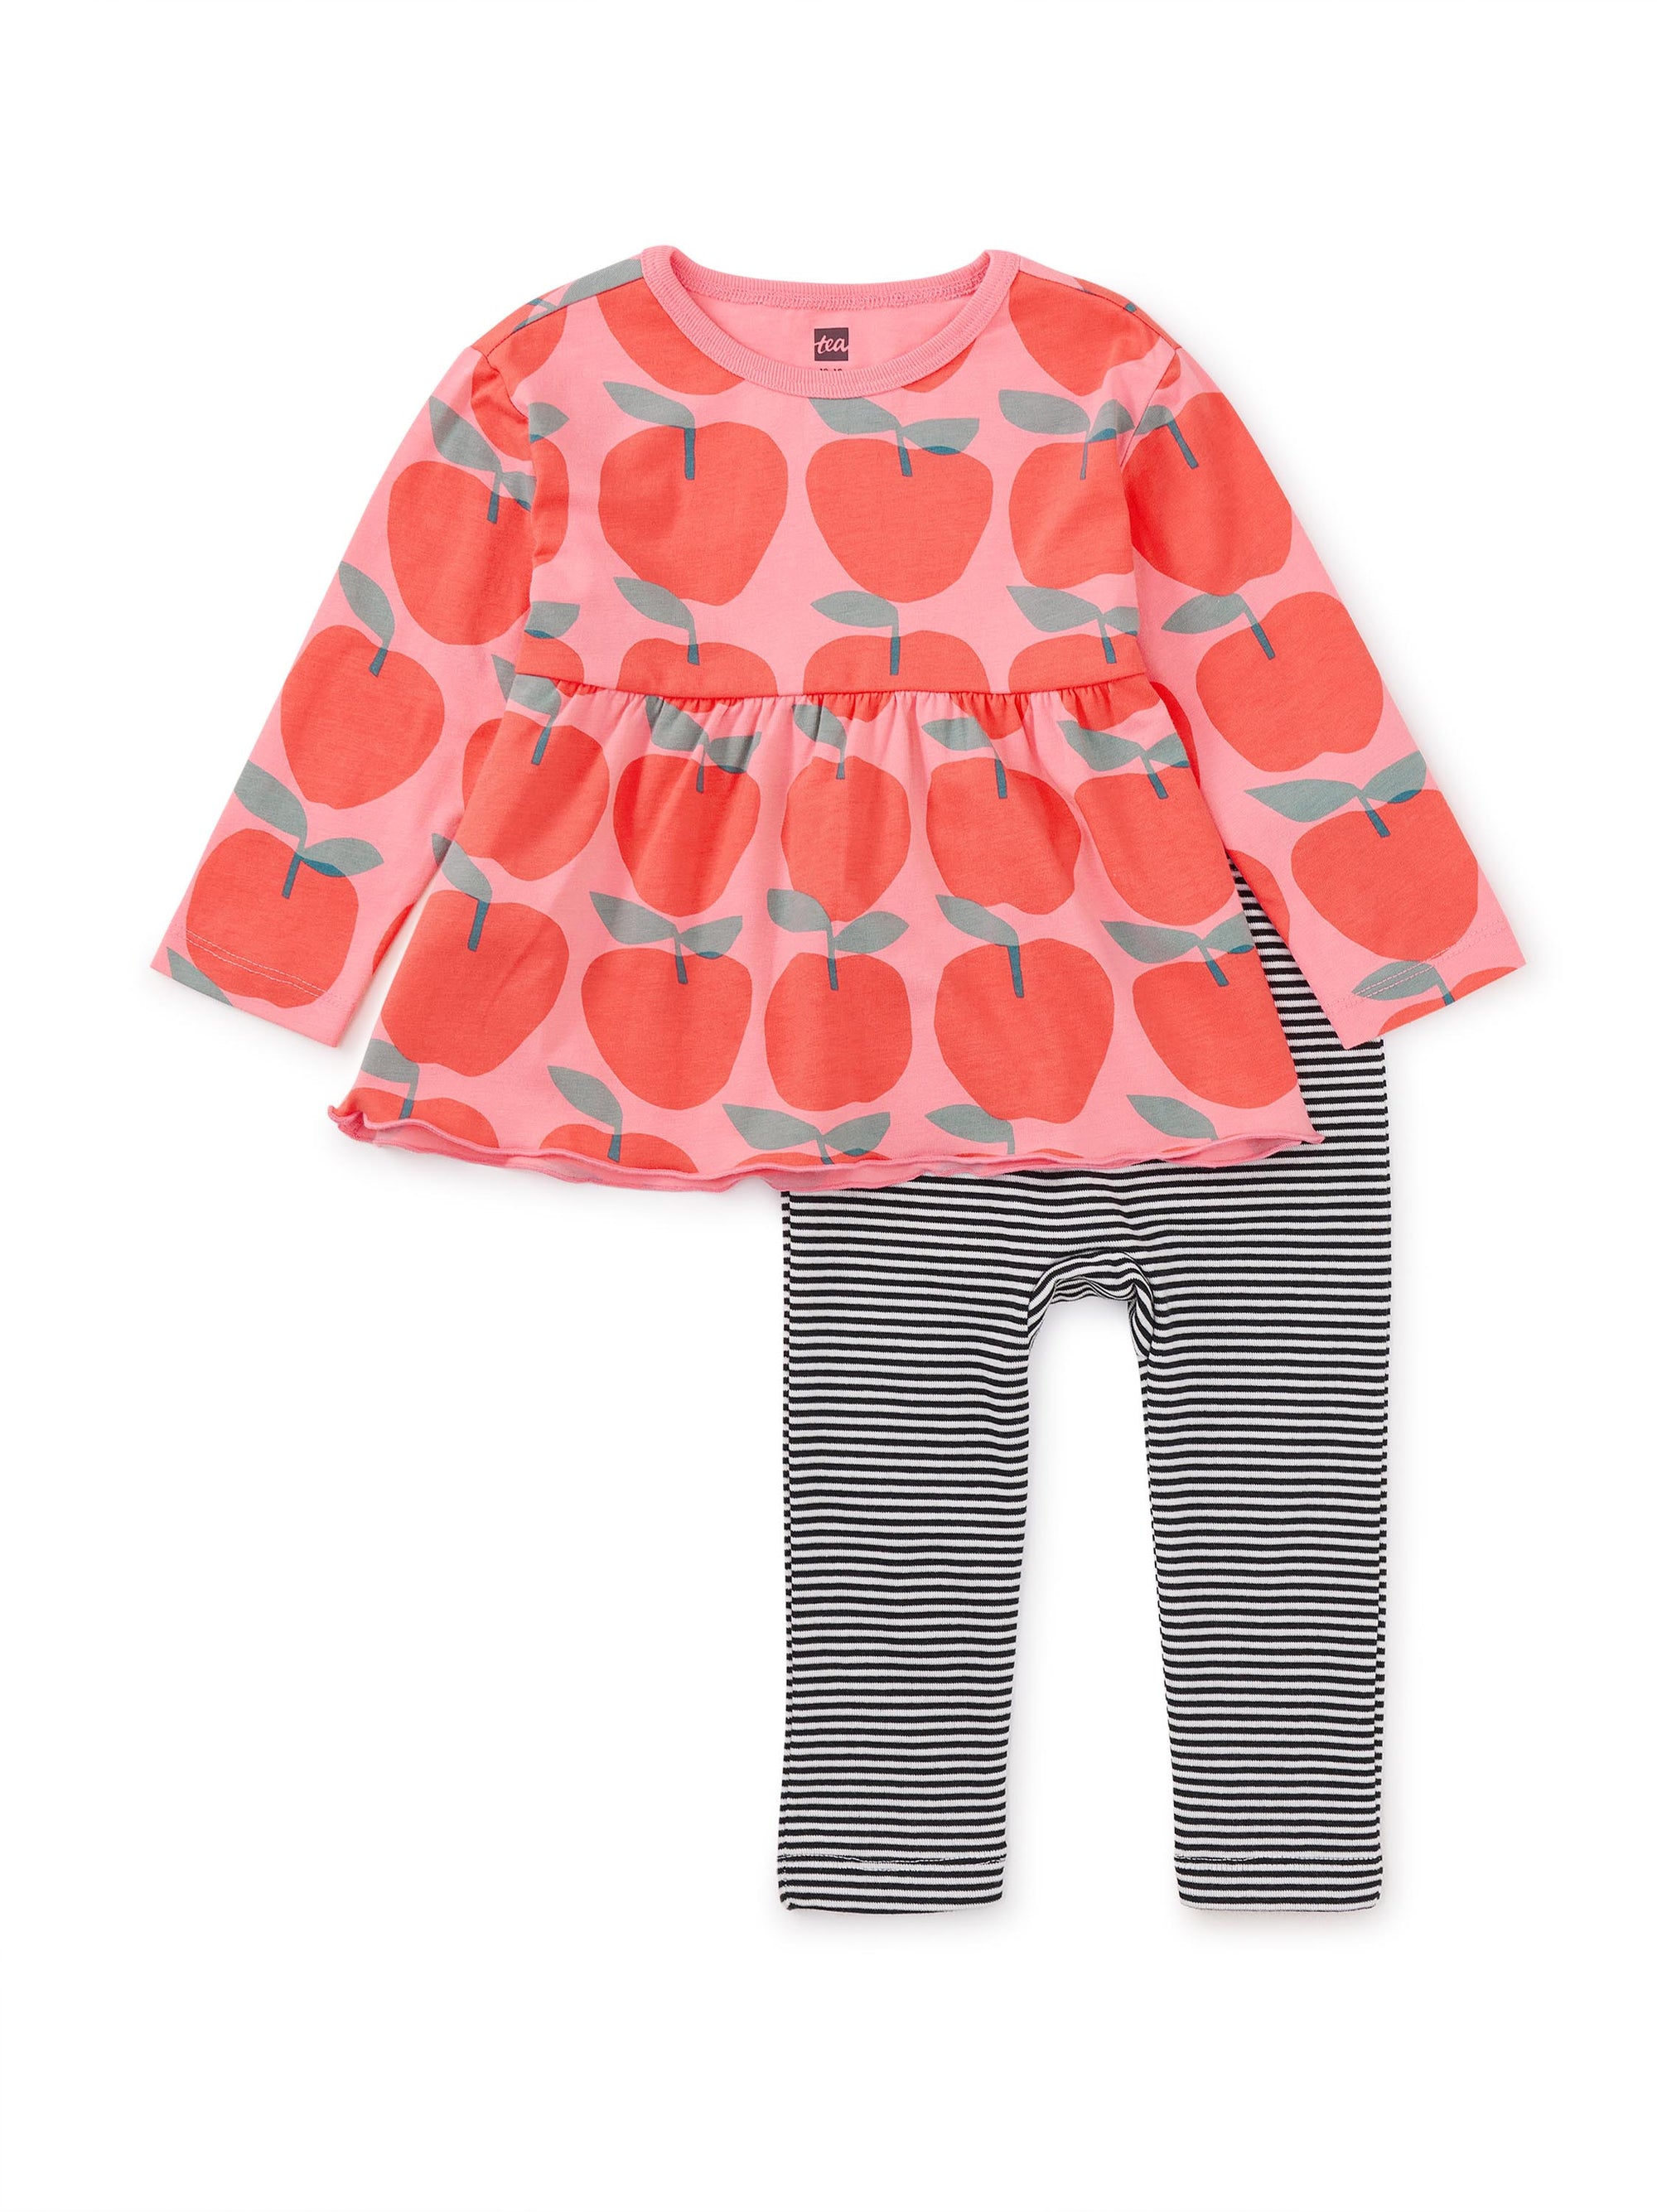 Tea Collection Peplum Top and Baby Set | Normandy Apples